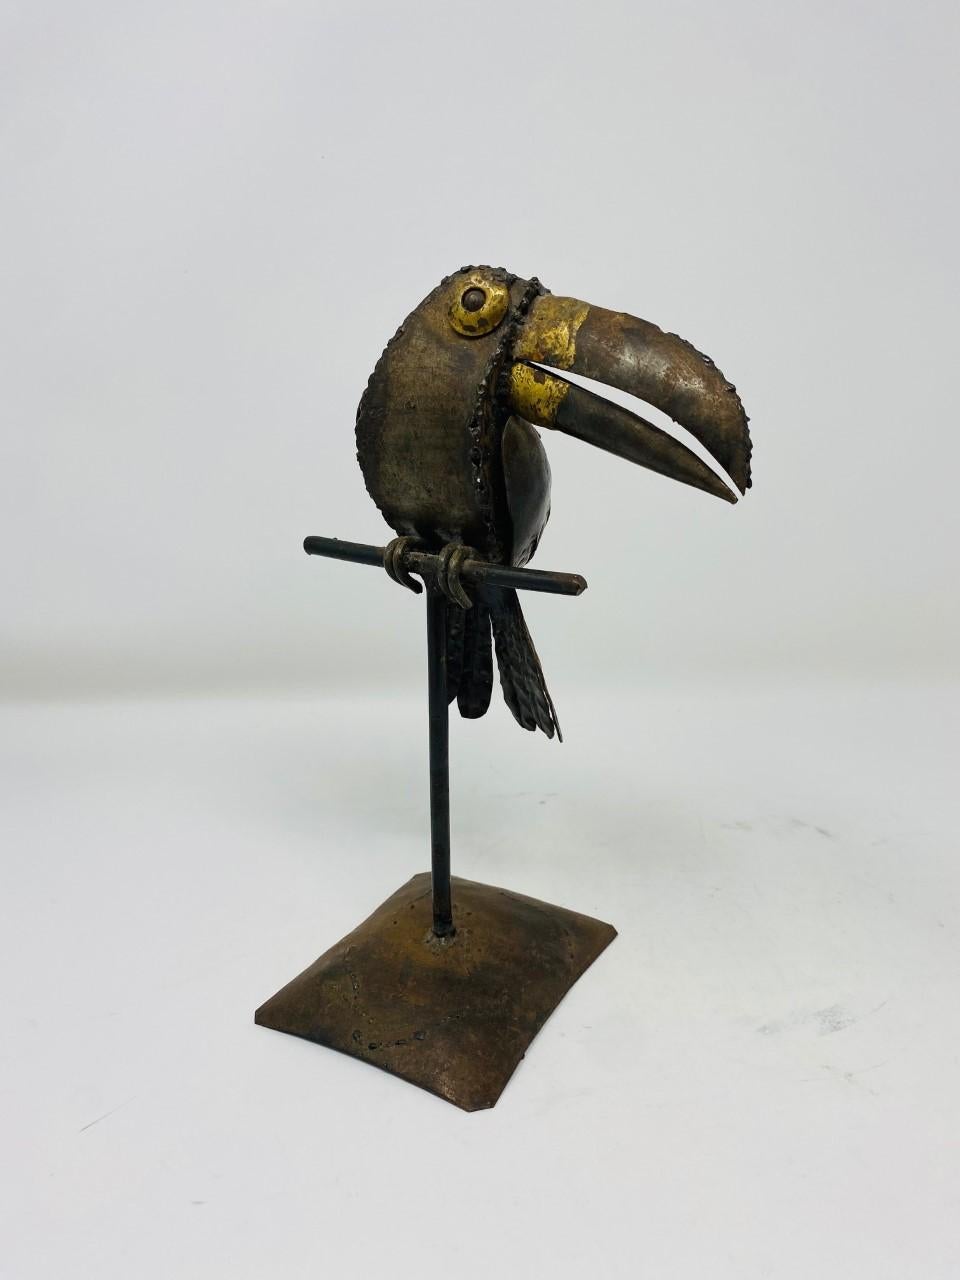 Sculptural Toucan bird on metal perch, made of mixed metals (copper, brass). This 1970s piece follows the style of Sergio Bustamante. The mix of metals adds vibrancy and depth to the form and the details on the feathering and expressions allude to